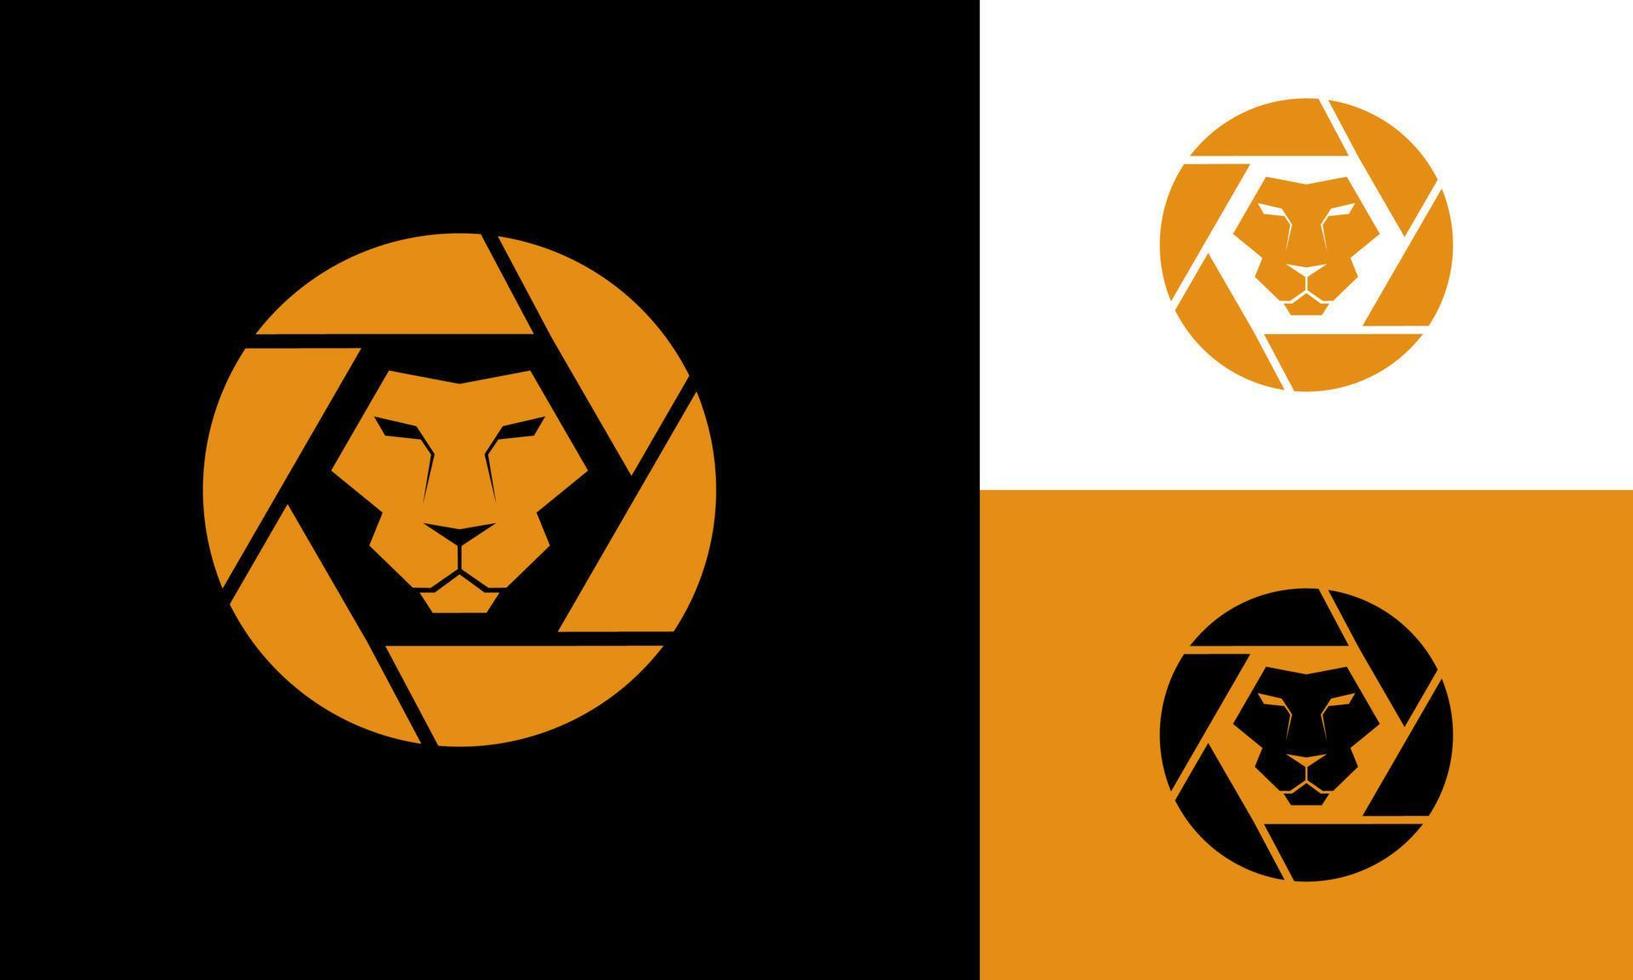 Vector illustration lion  head icon on camera shutter. Good for anything related to wildlife, photography, wild tour